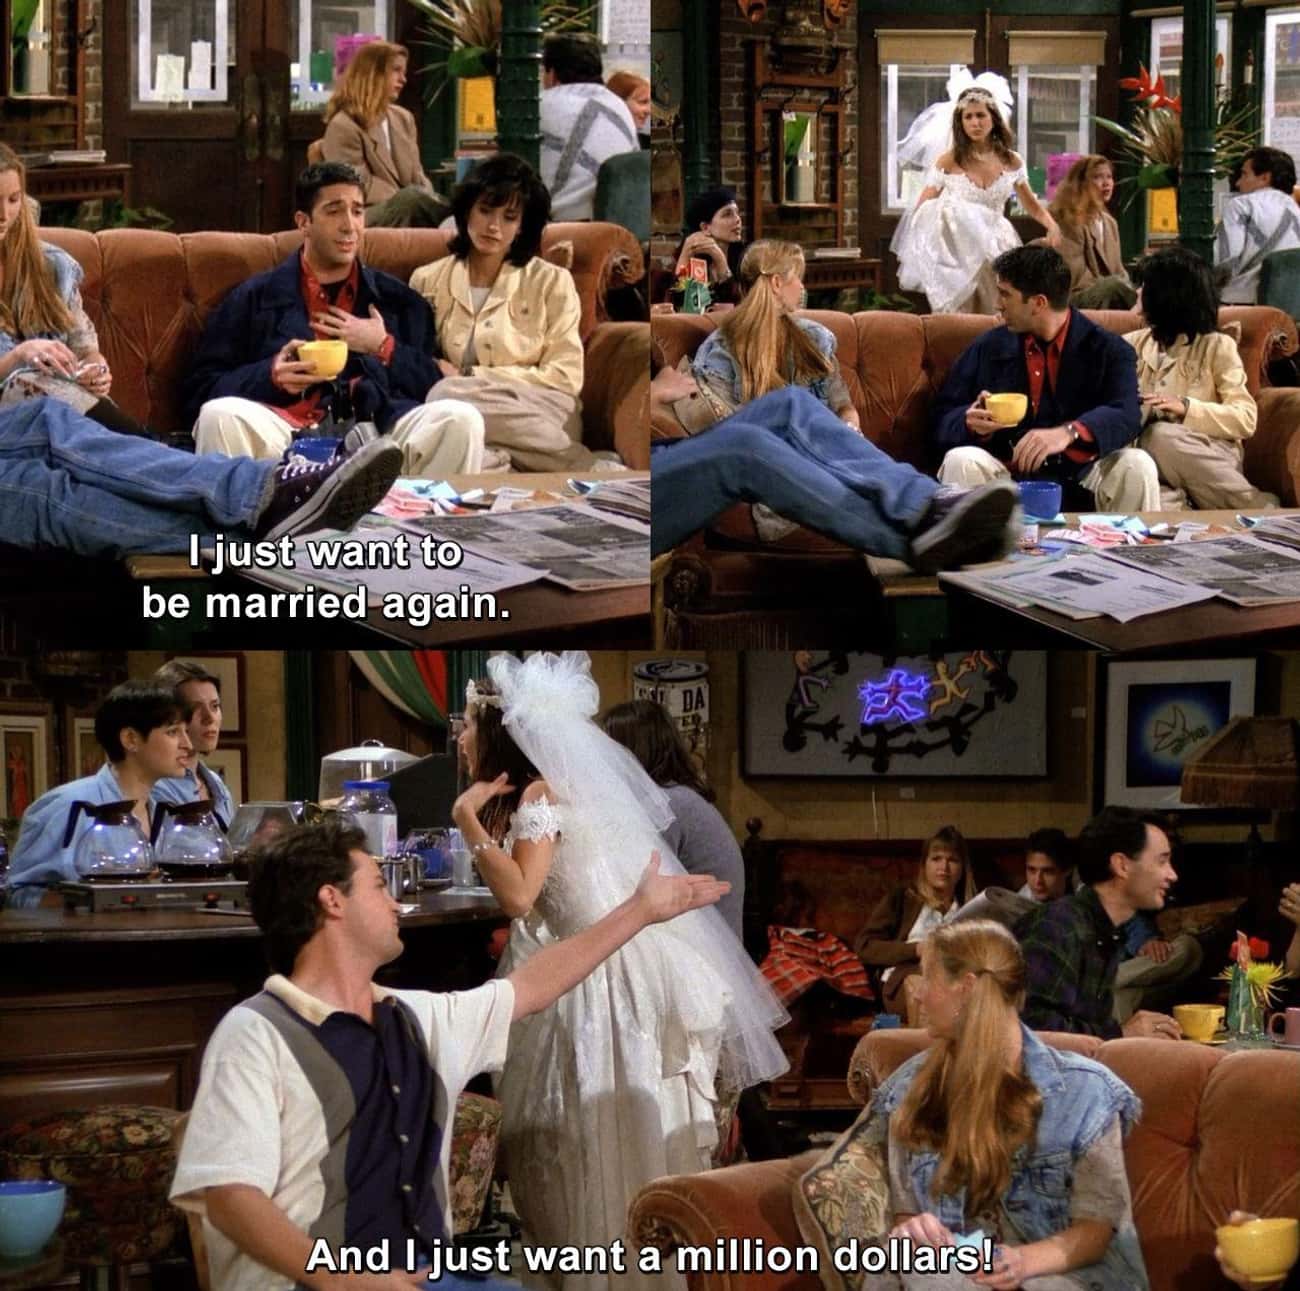 In The ‘Friends’ Pilot, Ross Shouts Out, ‘I Just Want To Be Married Again!’ Before His High School Crush Rachel Walks In Wearing A Wedding Dress